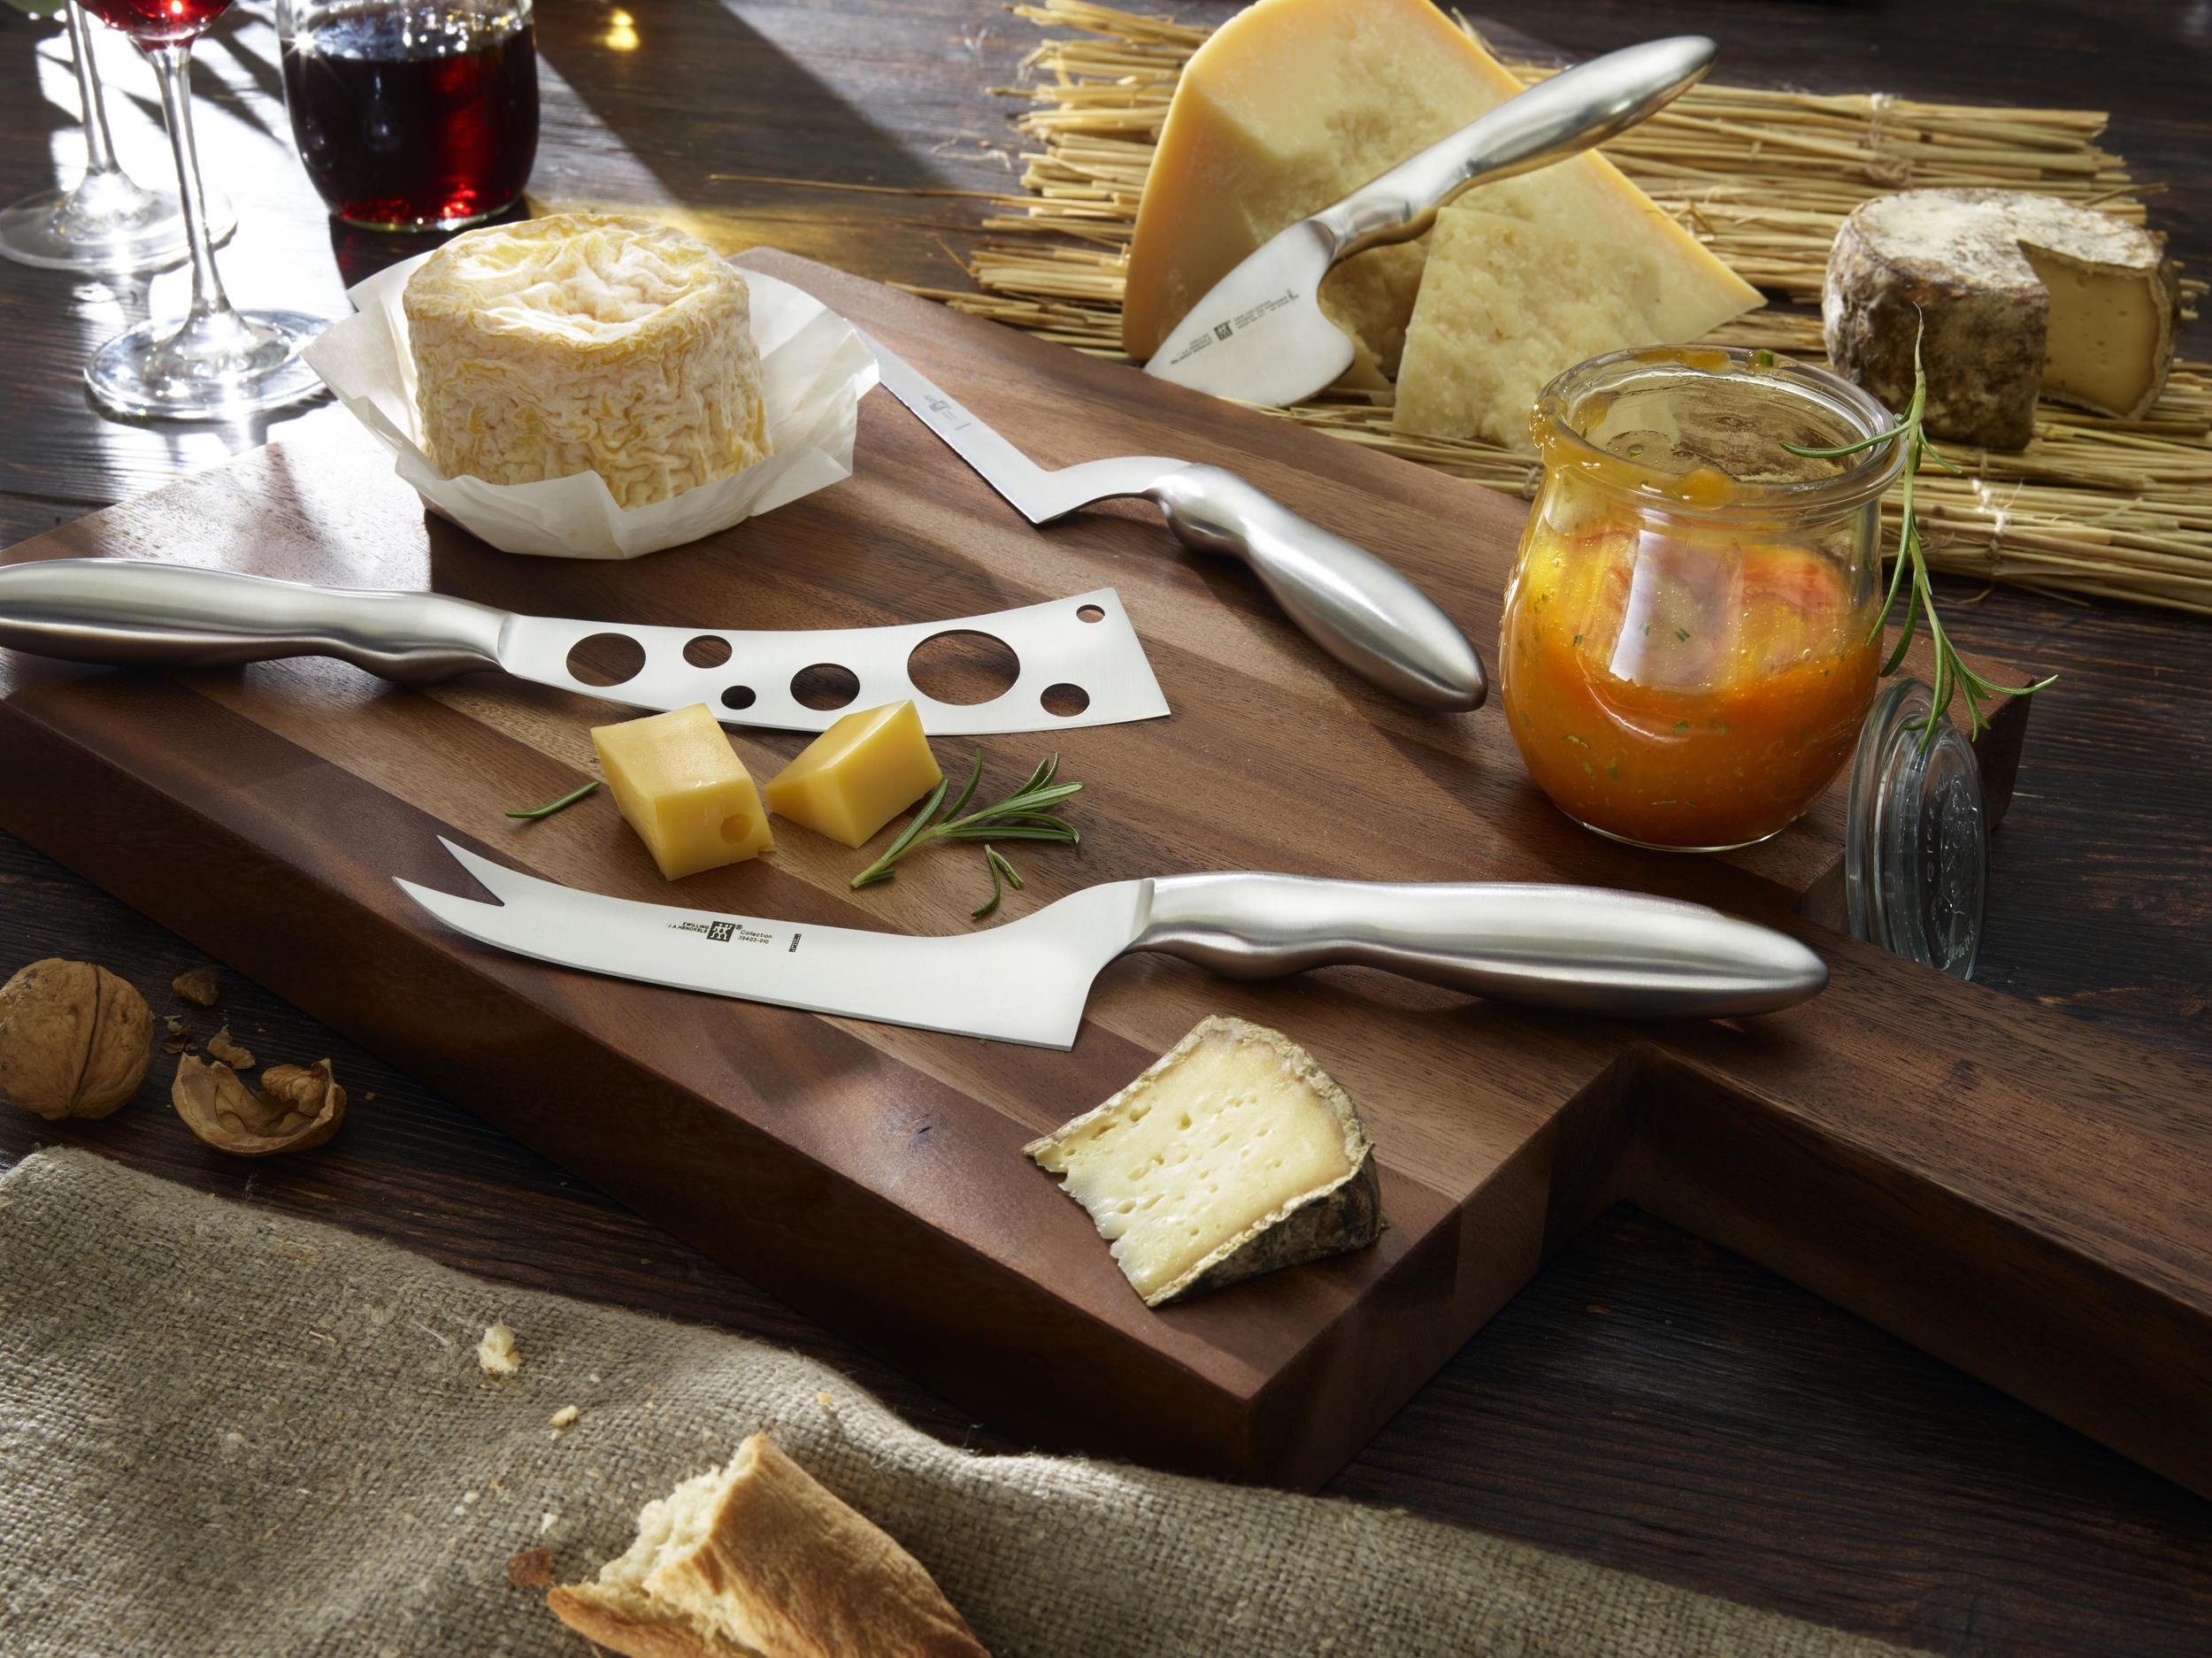 https://3fa-media.com/zwilling/zwilling-zwilling-collection-soft-cheese-knife-13-cm__129934_13133df-s2500x2500.jpg